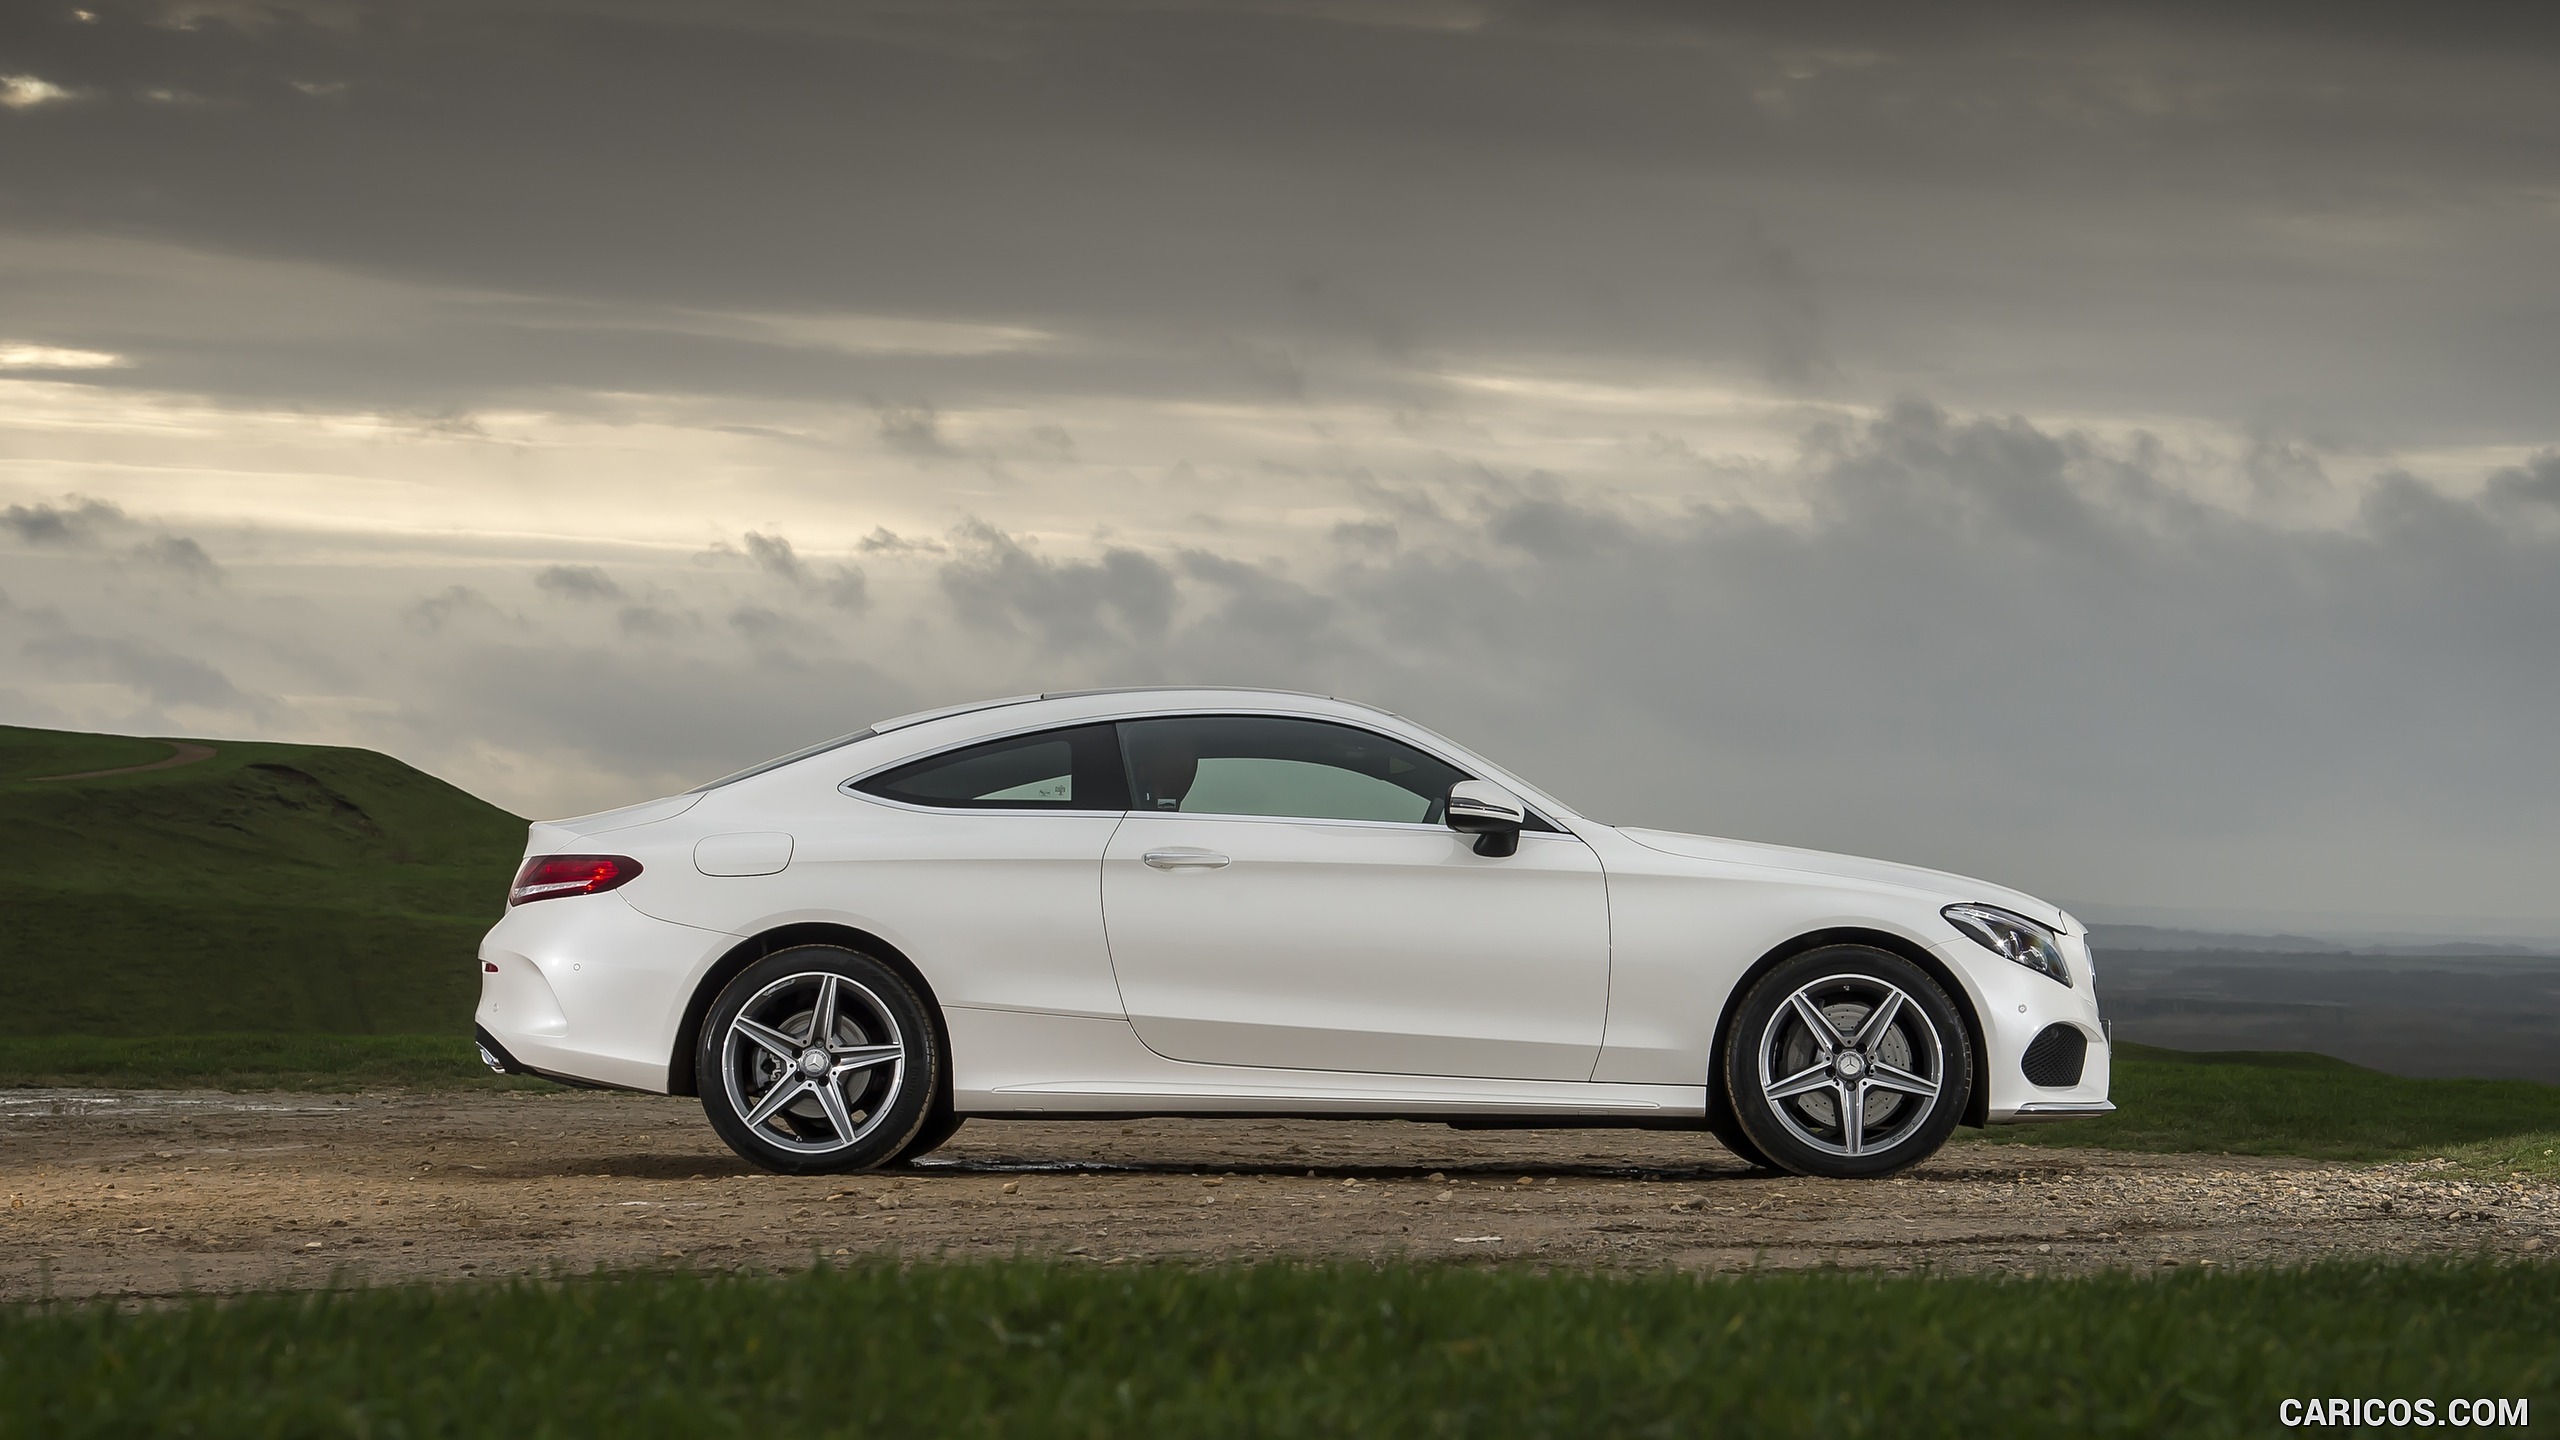 2017 Mercedes-Benz C-Class Coupe (UK-Spec) - Side, #118 of 210